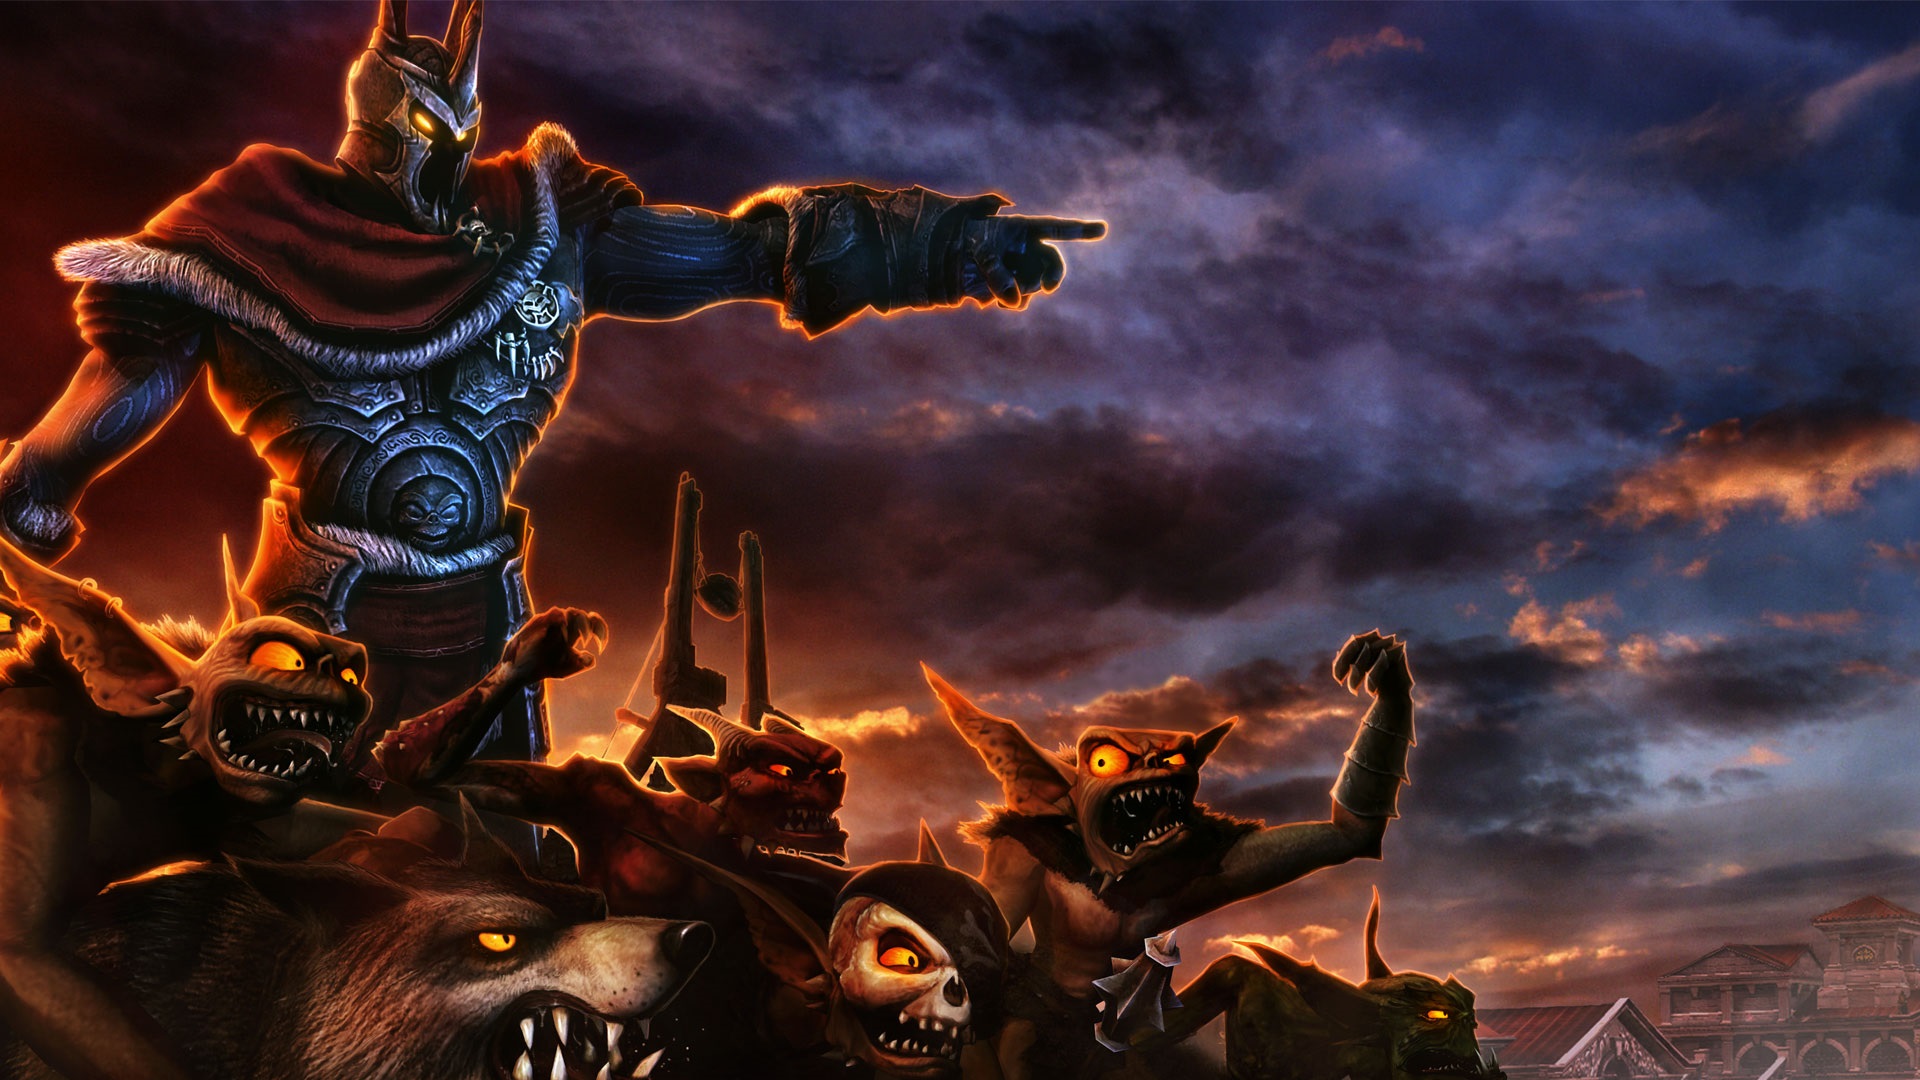 Full Hd Wallpaper Overlord Army Minion Evil Smoke Attack - Overlord Evil Always Finds A Way , HD Wallpaper & Backgrounds